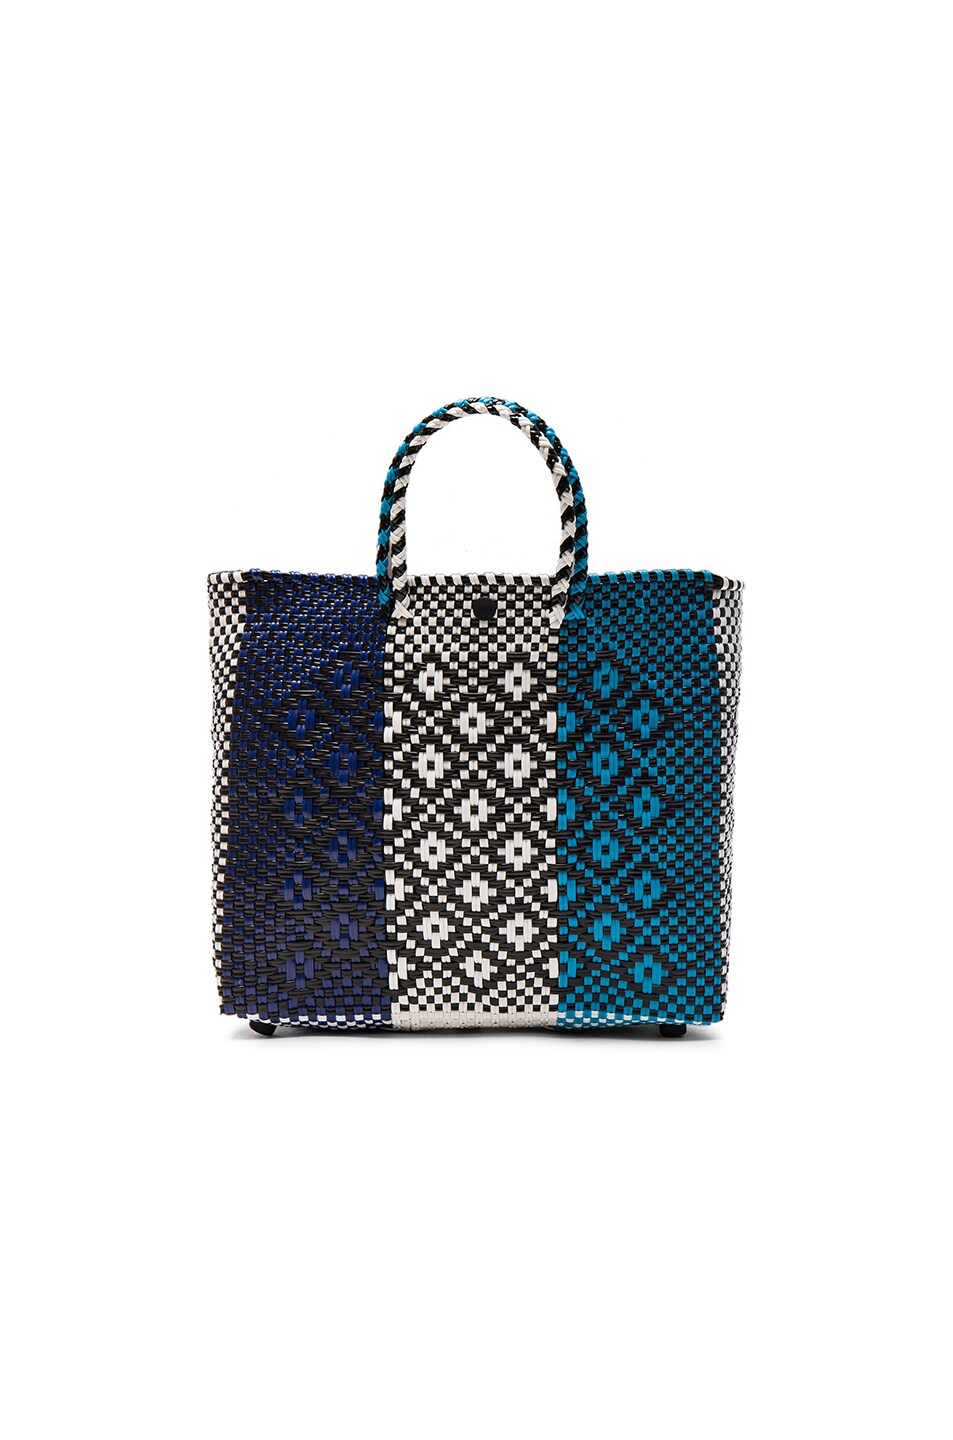 Image 1 of Truss FWRD Exclusive Crossbody Bag in Navy, Turquoise & White